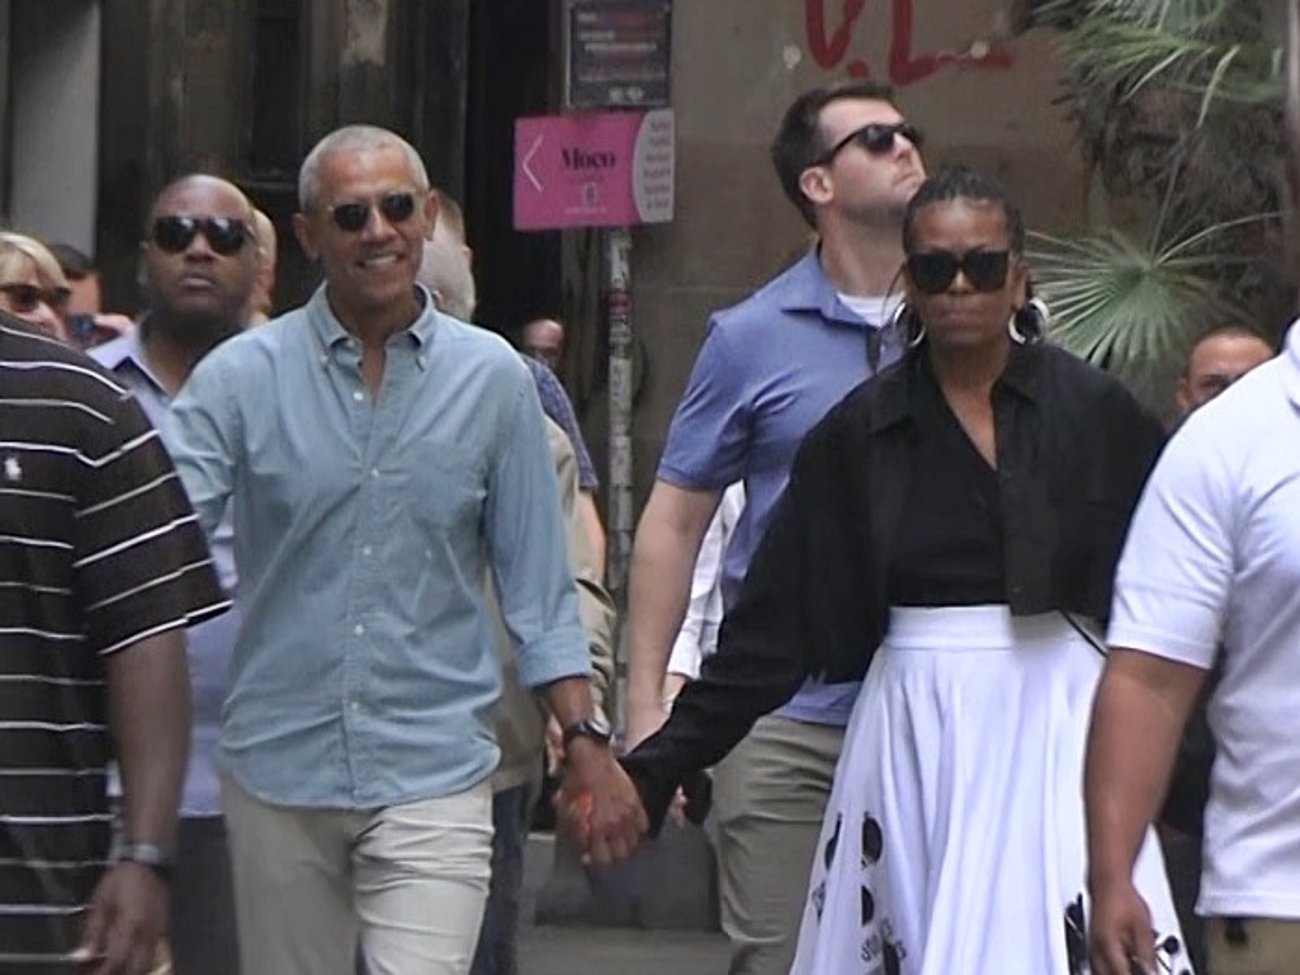 Barack and Michelle Obama walk love in the streets of Barcelona